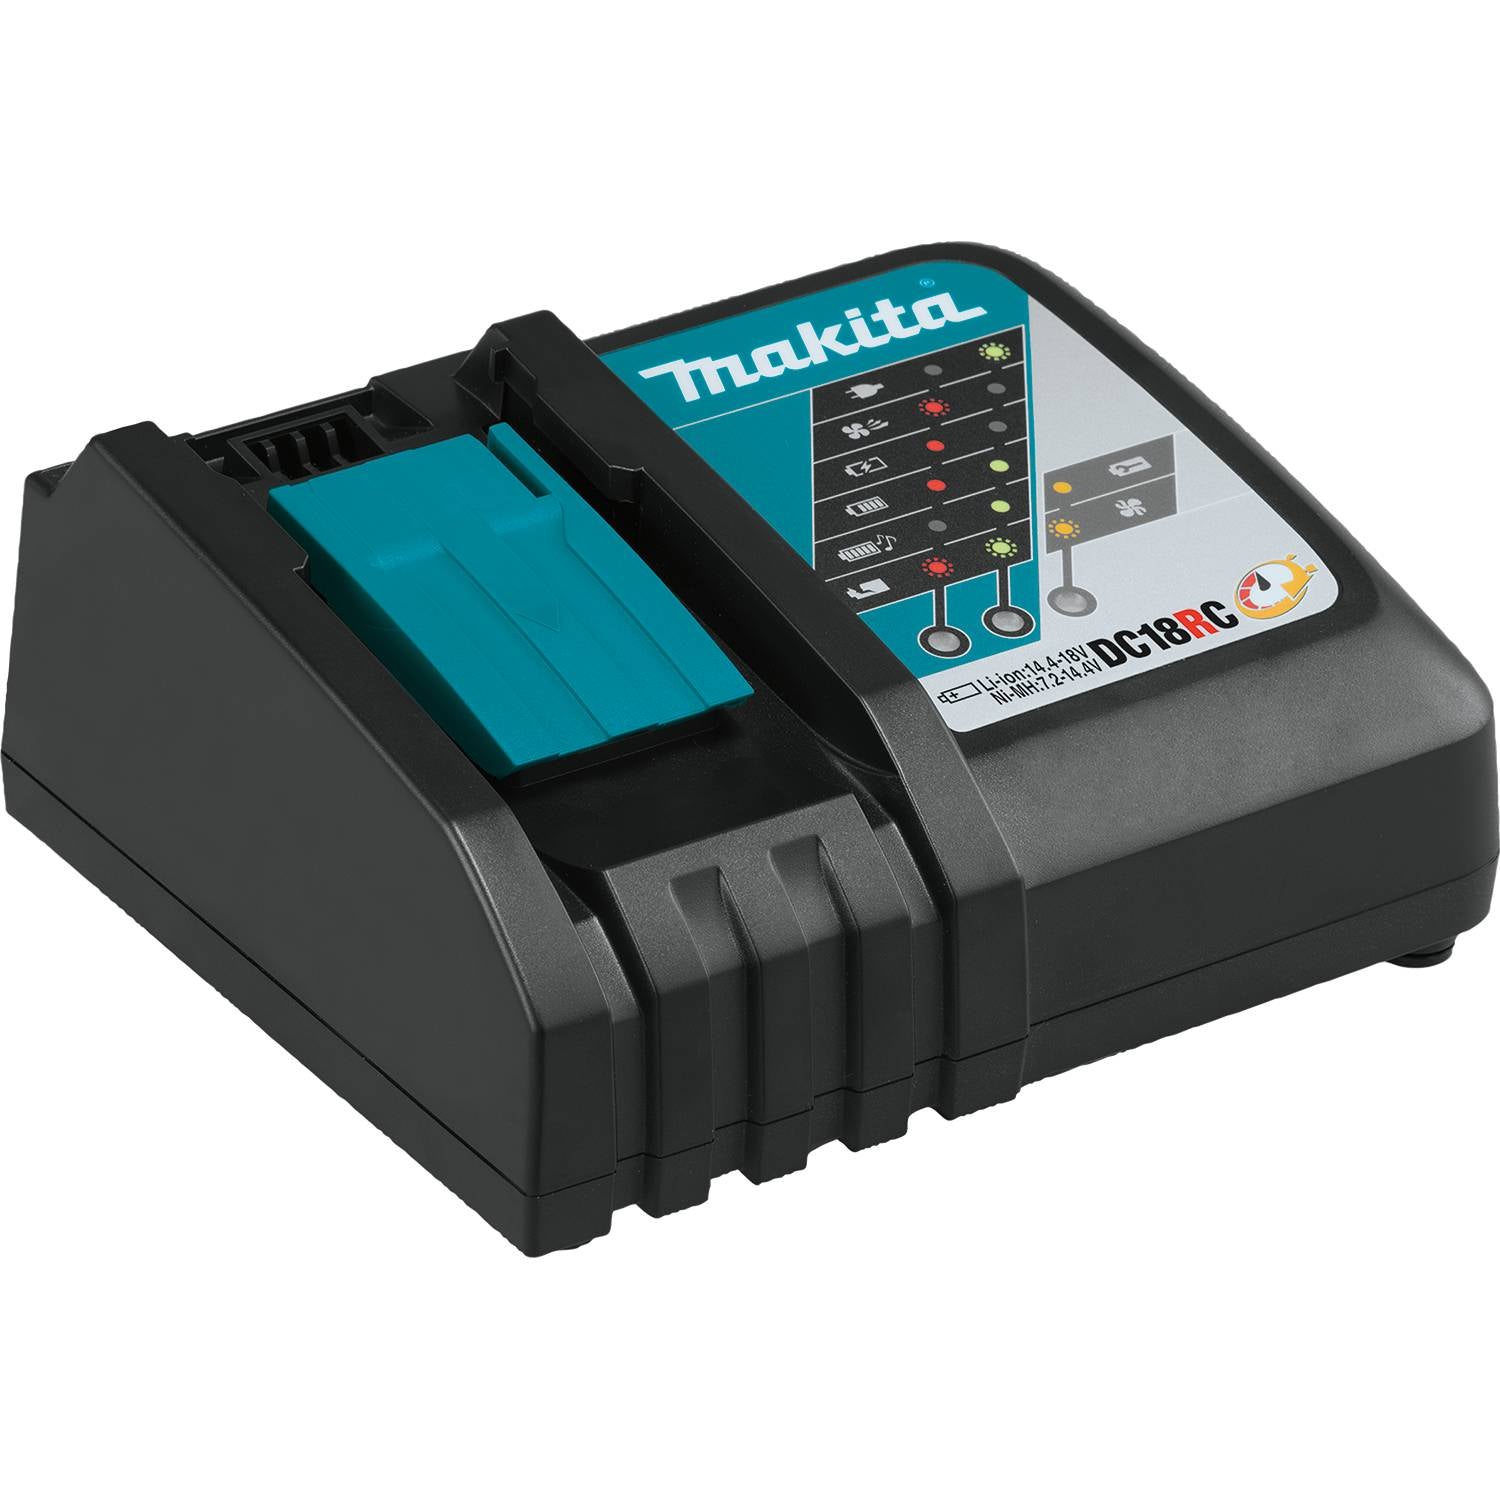 Makita ADBL1840BDC1 Outdoor Adventure 18V LXT Lithium-Ion 4.0Ah Battery and Charger Starter Kit